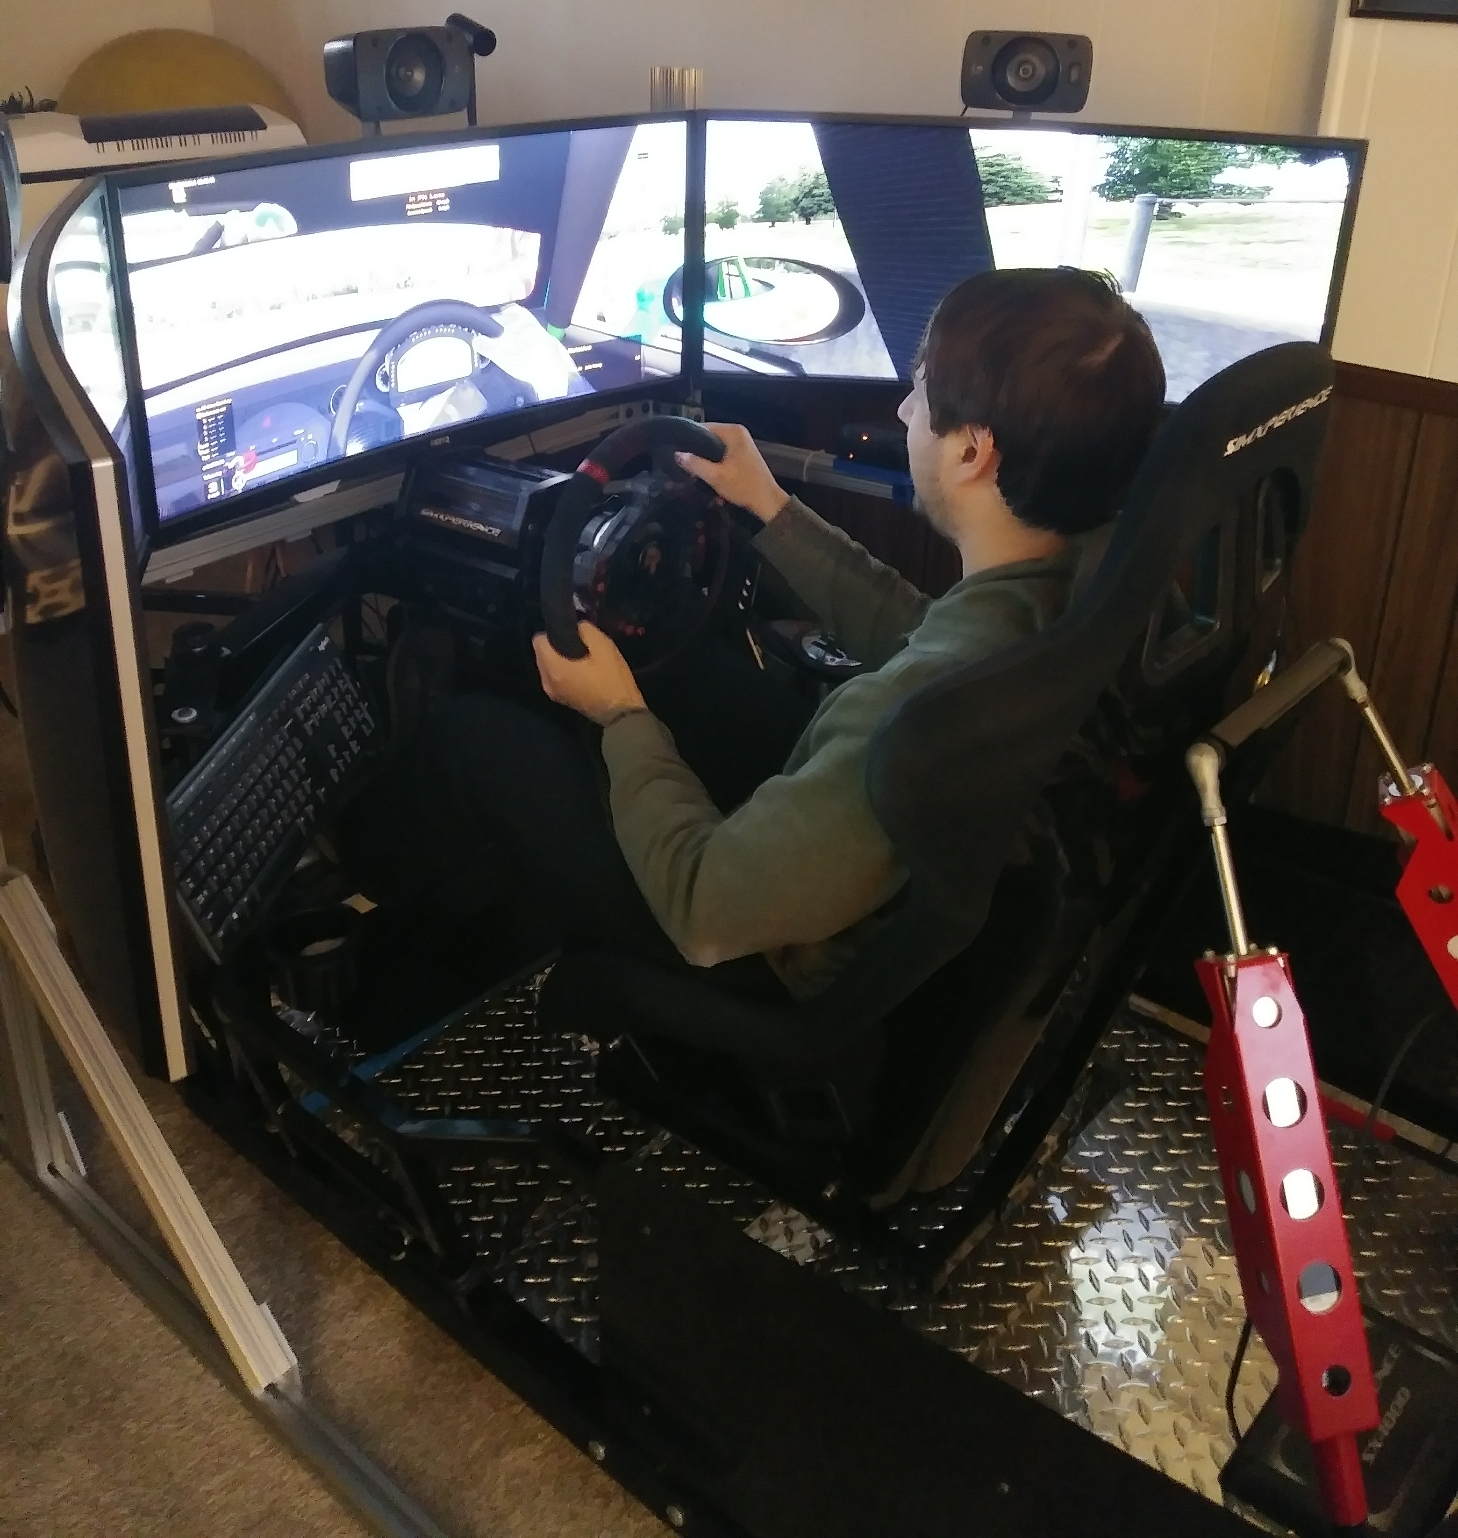 Me practicing with racing simulator